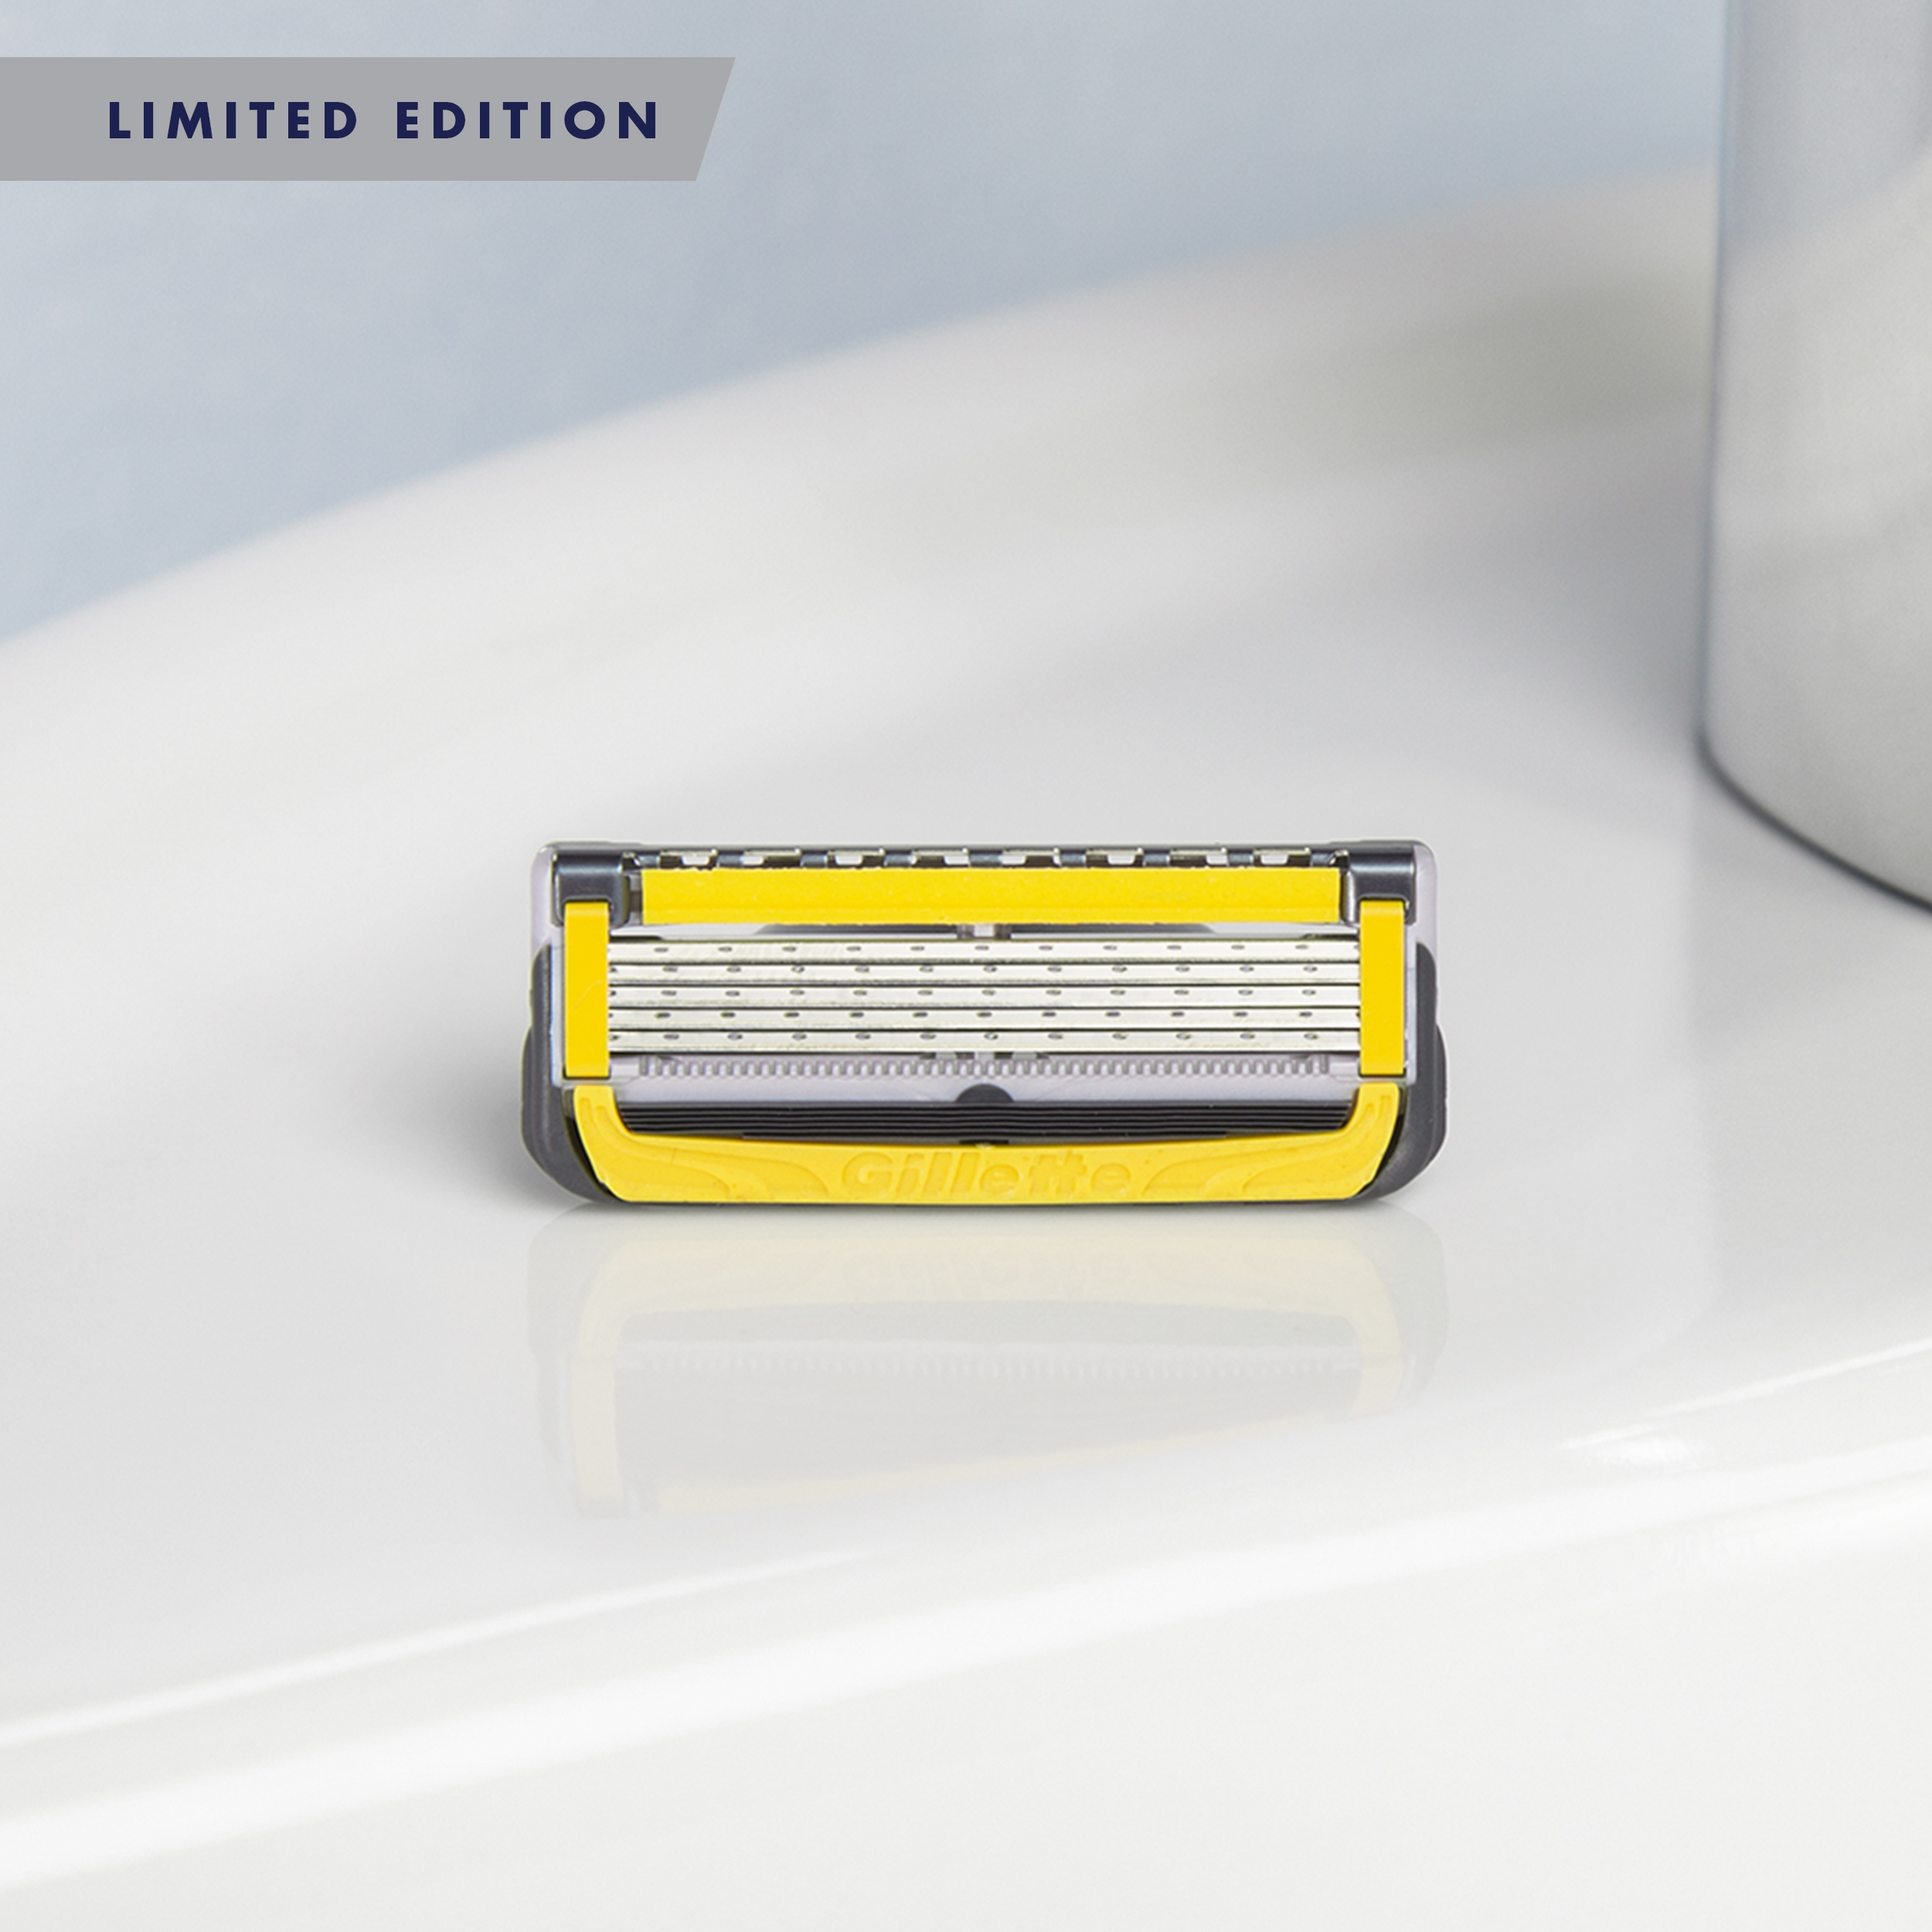 Gillette Limited Edition Fusion5 ProShield Razor Gift Pack - image 4 of 6